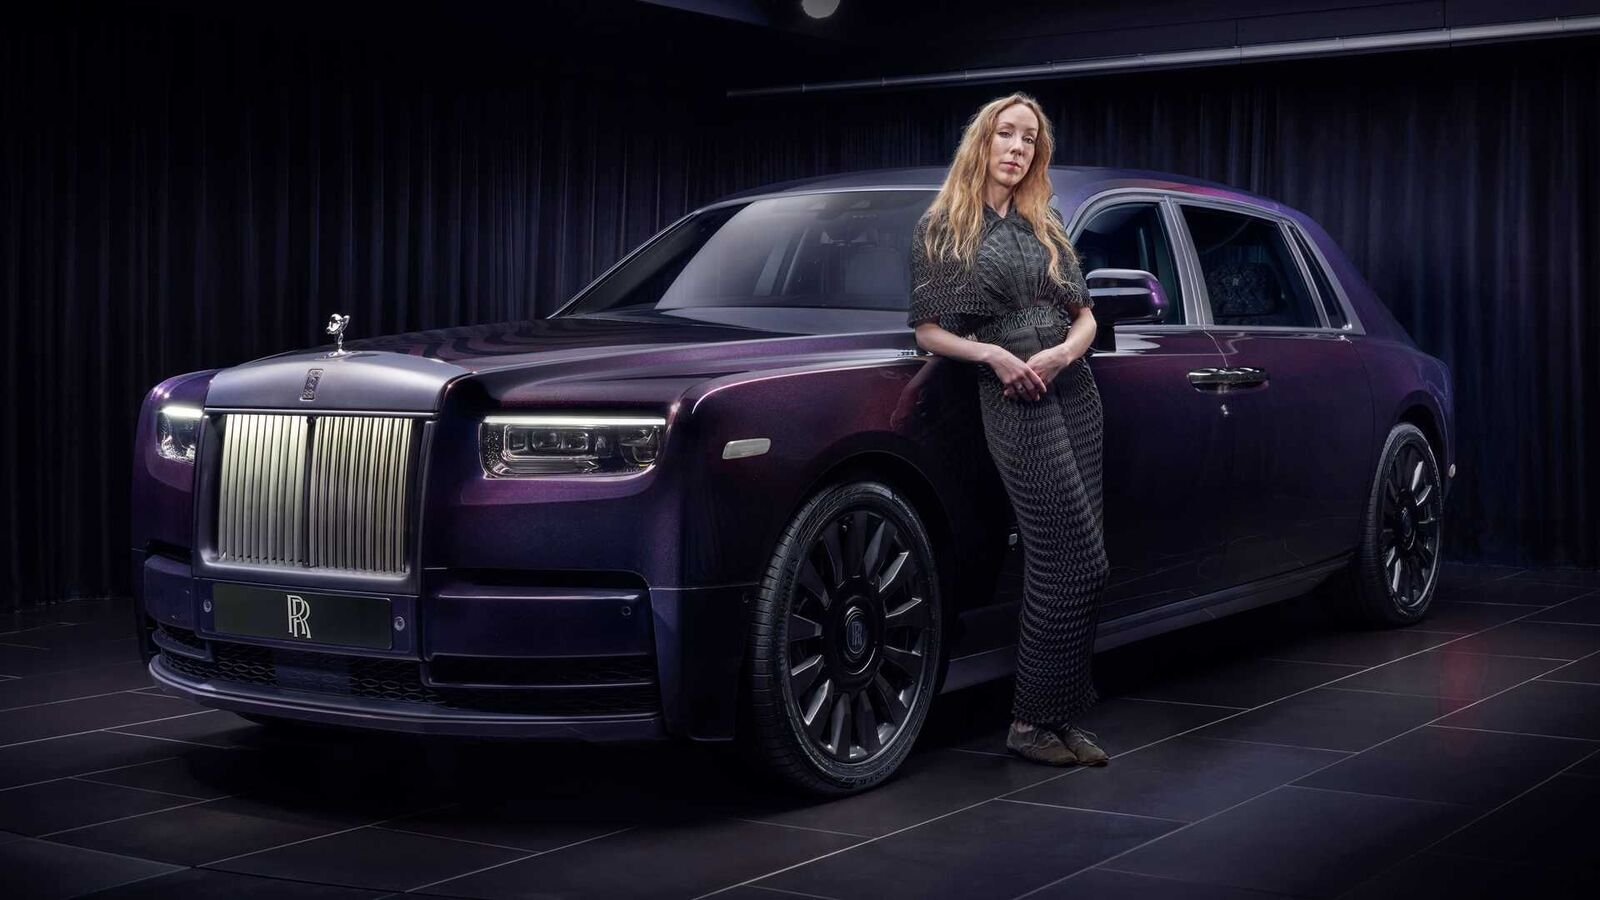 Rolls-Royce Phantom review: the most luxurious car on the planet